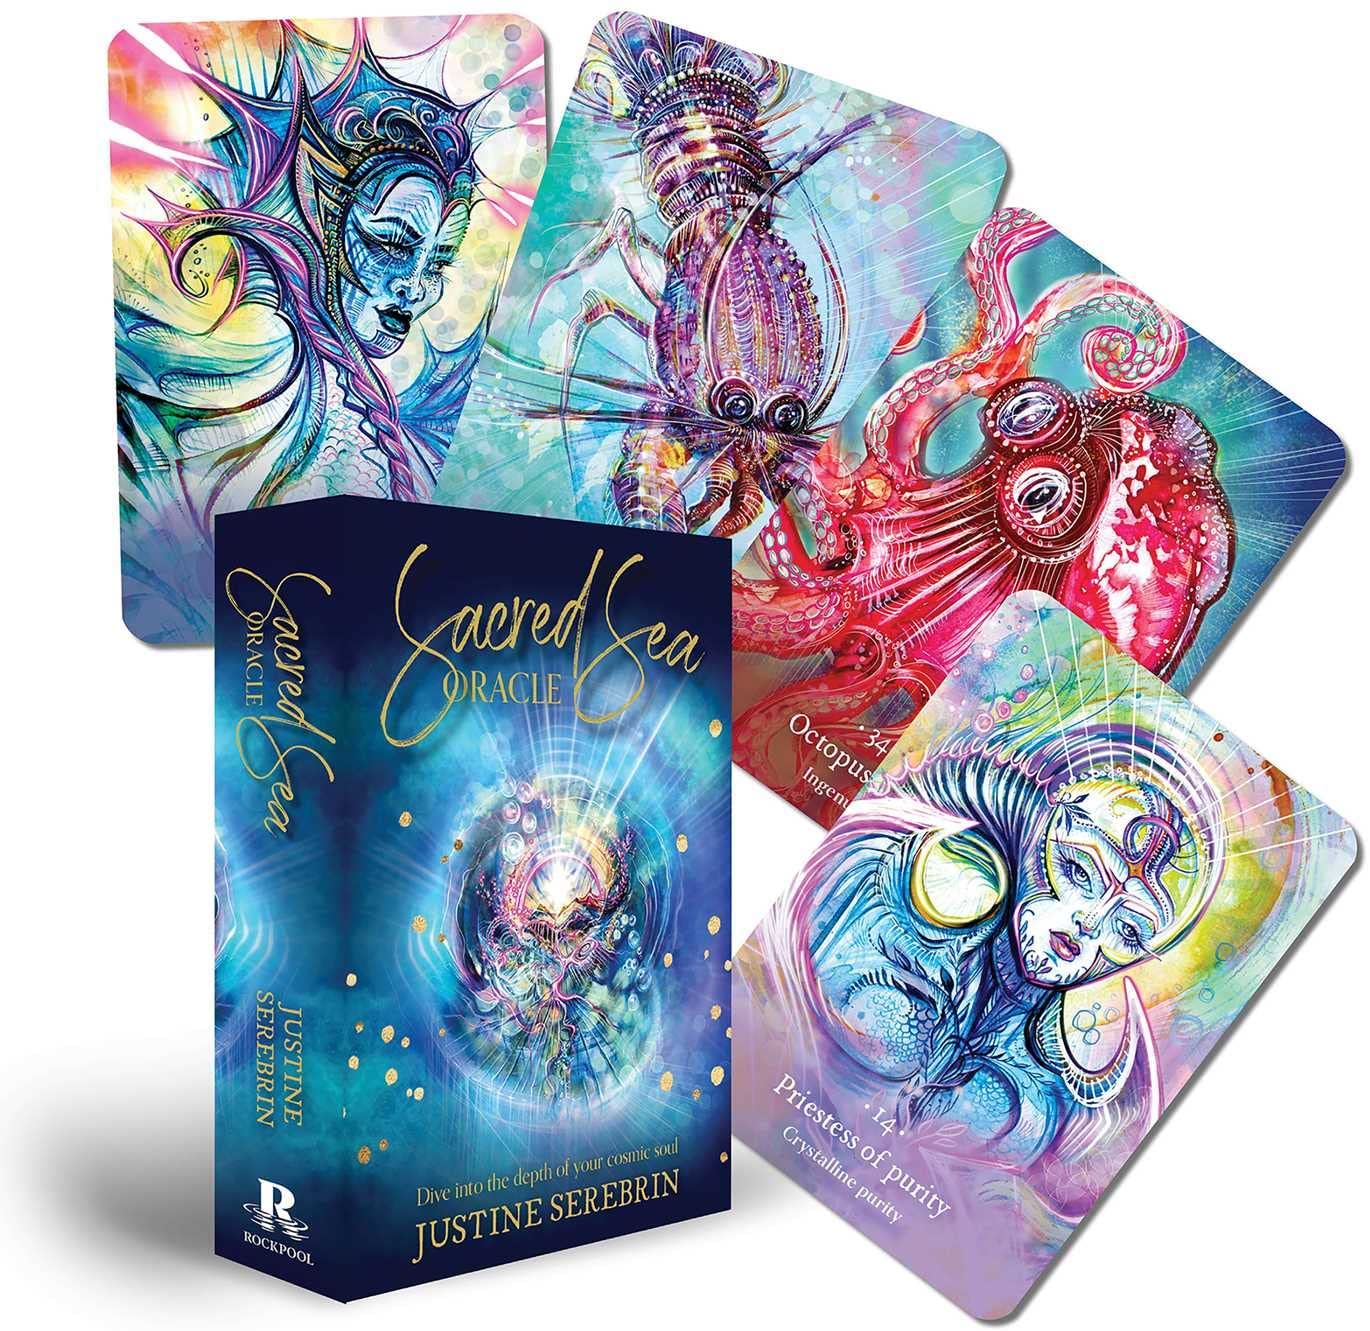 Sacred Sea Oracle: Divine into the Depth of Your Cosmic Soul